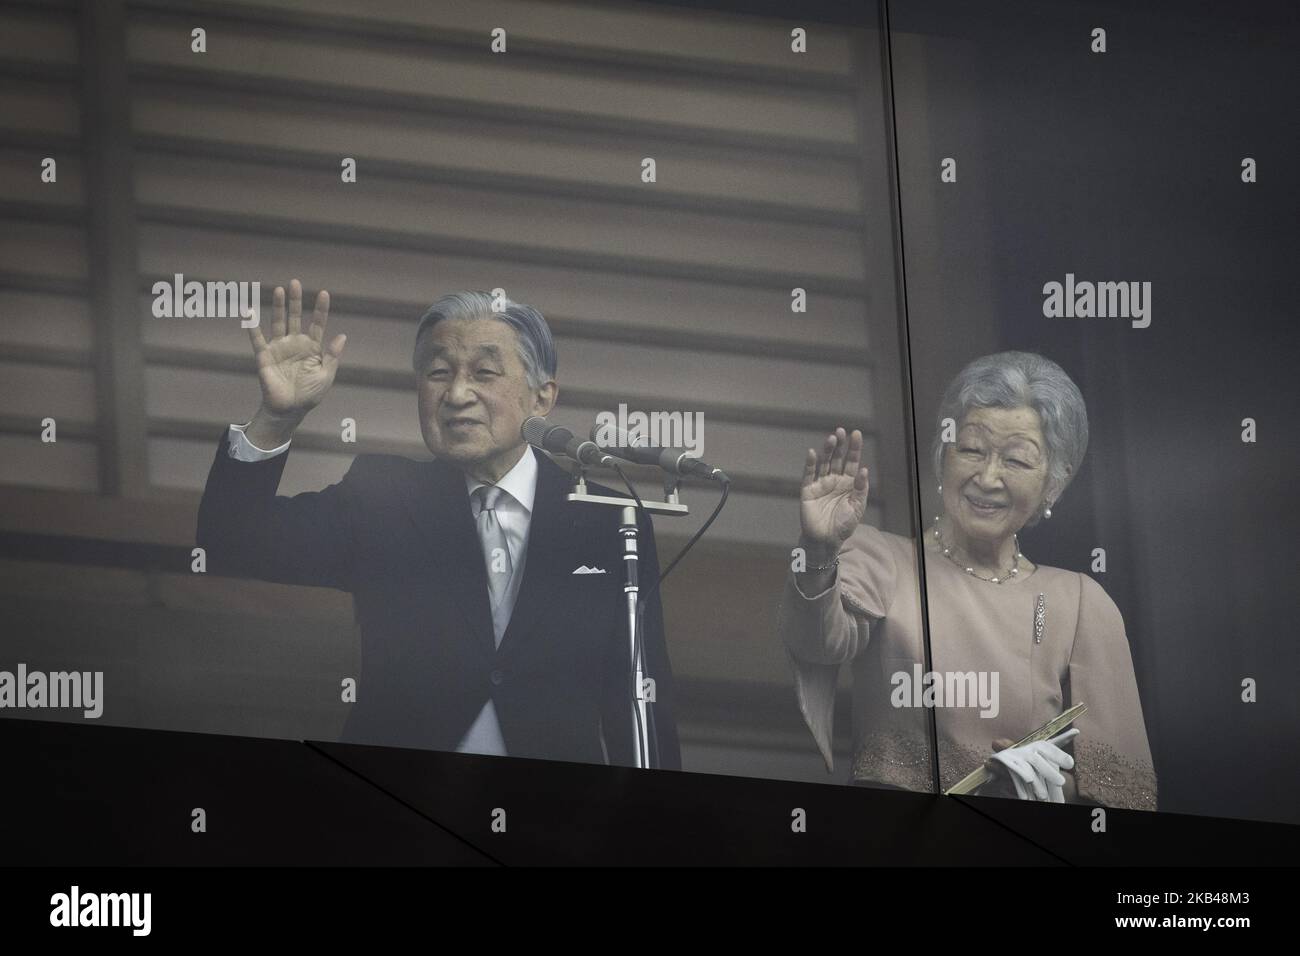 Emperor Akihito (L) and his wife Empress Michiko (R) waves to well-wishers as they appear on the balcony of the Imperial Palace to mark the emperor's 85th birthday at the Imperial Palace in Tokyo on December 23, 2018. The Emperor's abdication will be on April 30, 2019, and his eldest son, Crown Prince Naruhito's succession to the throne the following day. The Emperor's abdication will be on April 30, 2019, and his eldest son, Crown Prince Naruhito's succession to the throne the following day May 1st, in 2019. (Photo by Richard Atrero de Guzman/NurPhoto) Stock Photo